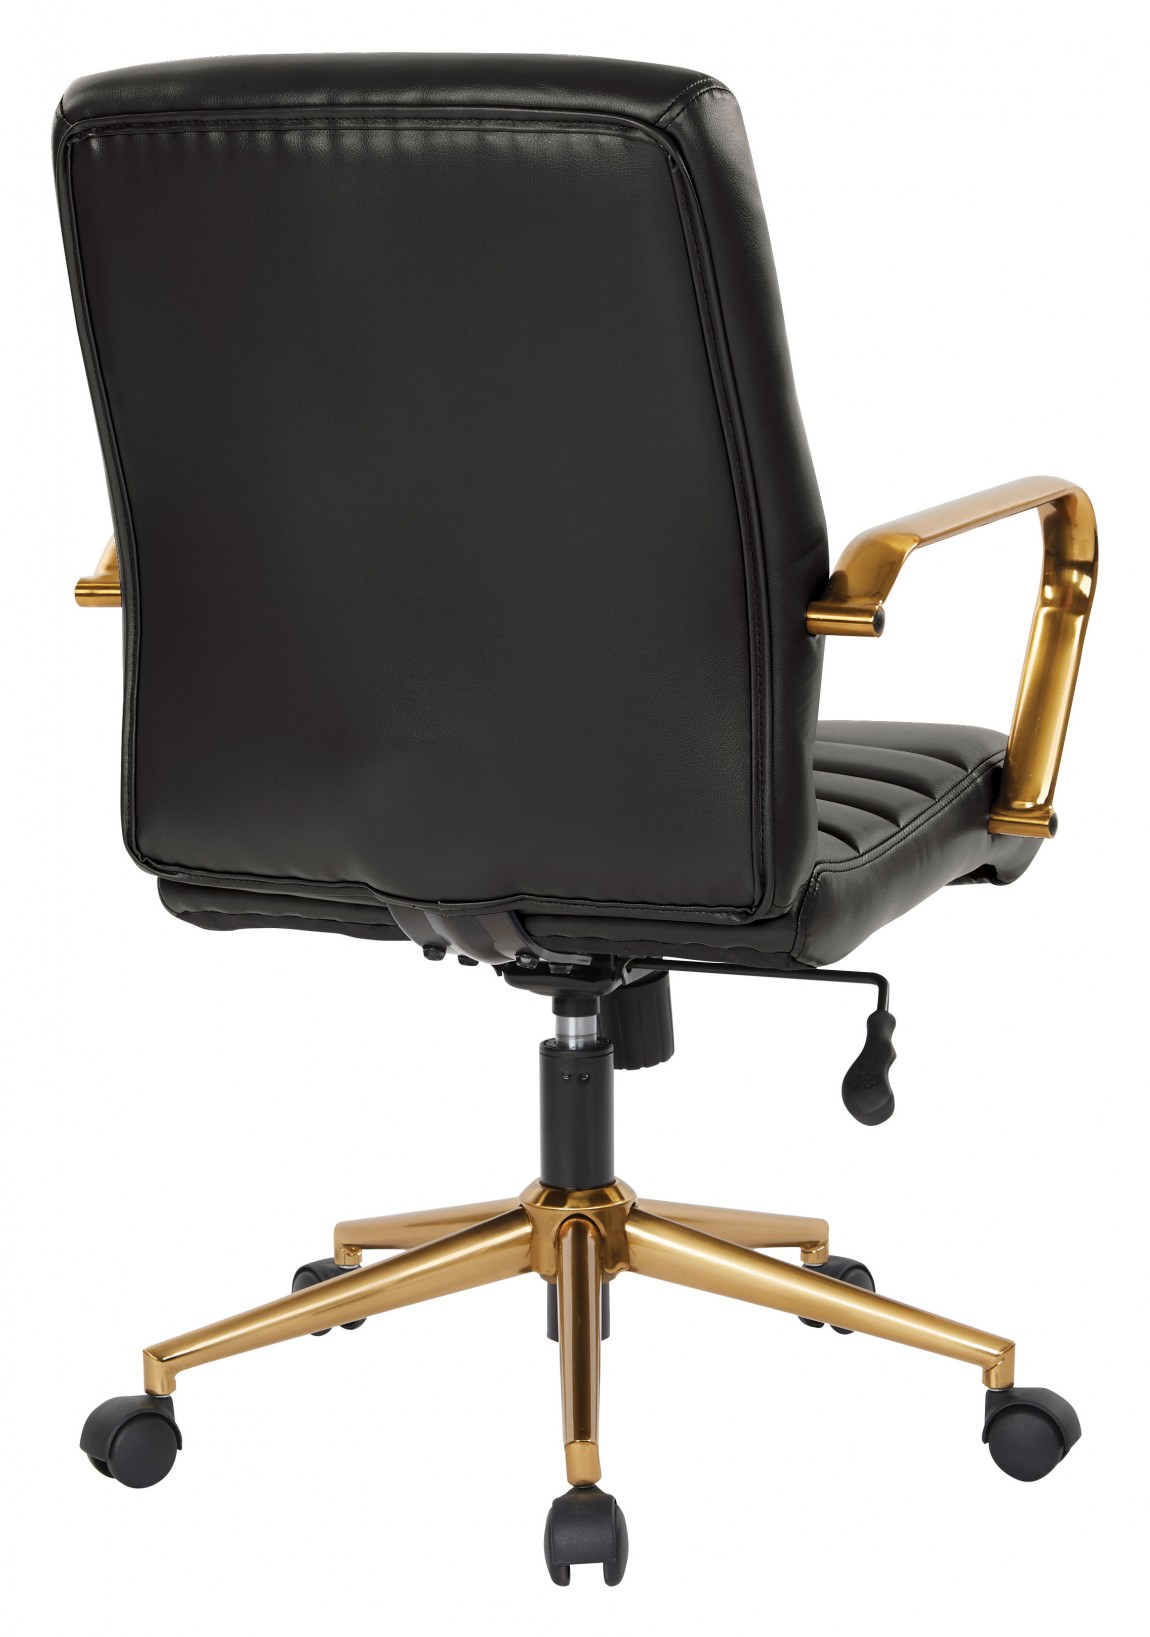 Executive Conference Room Chair